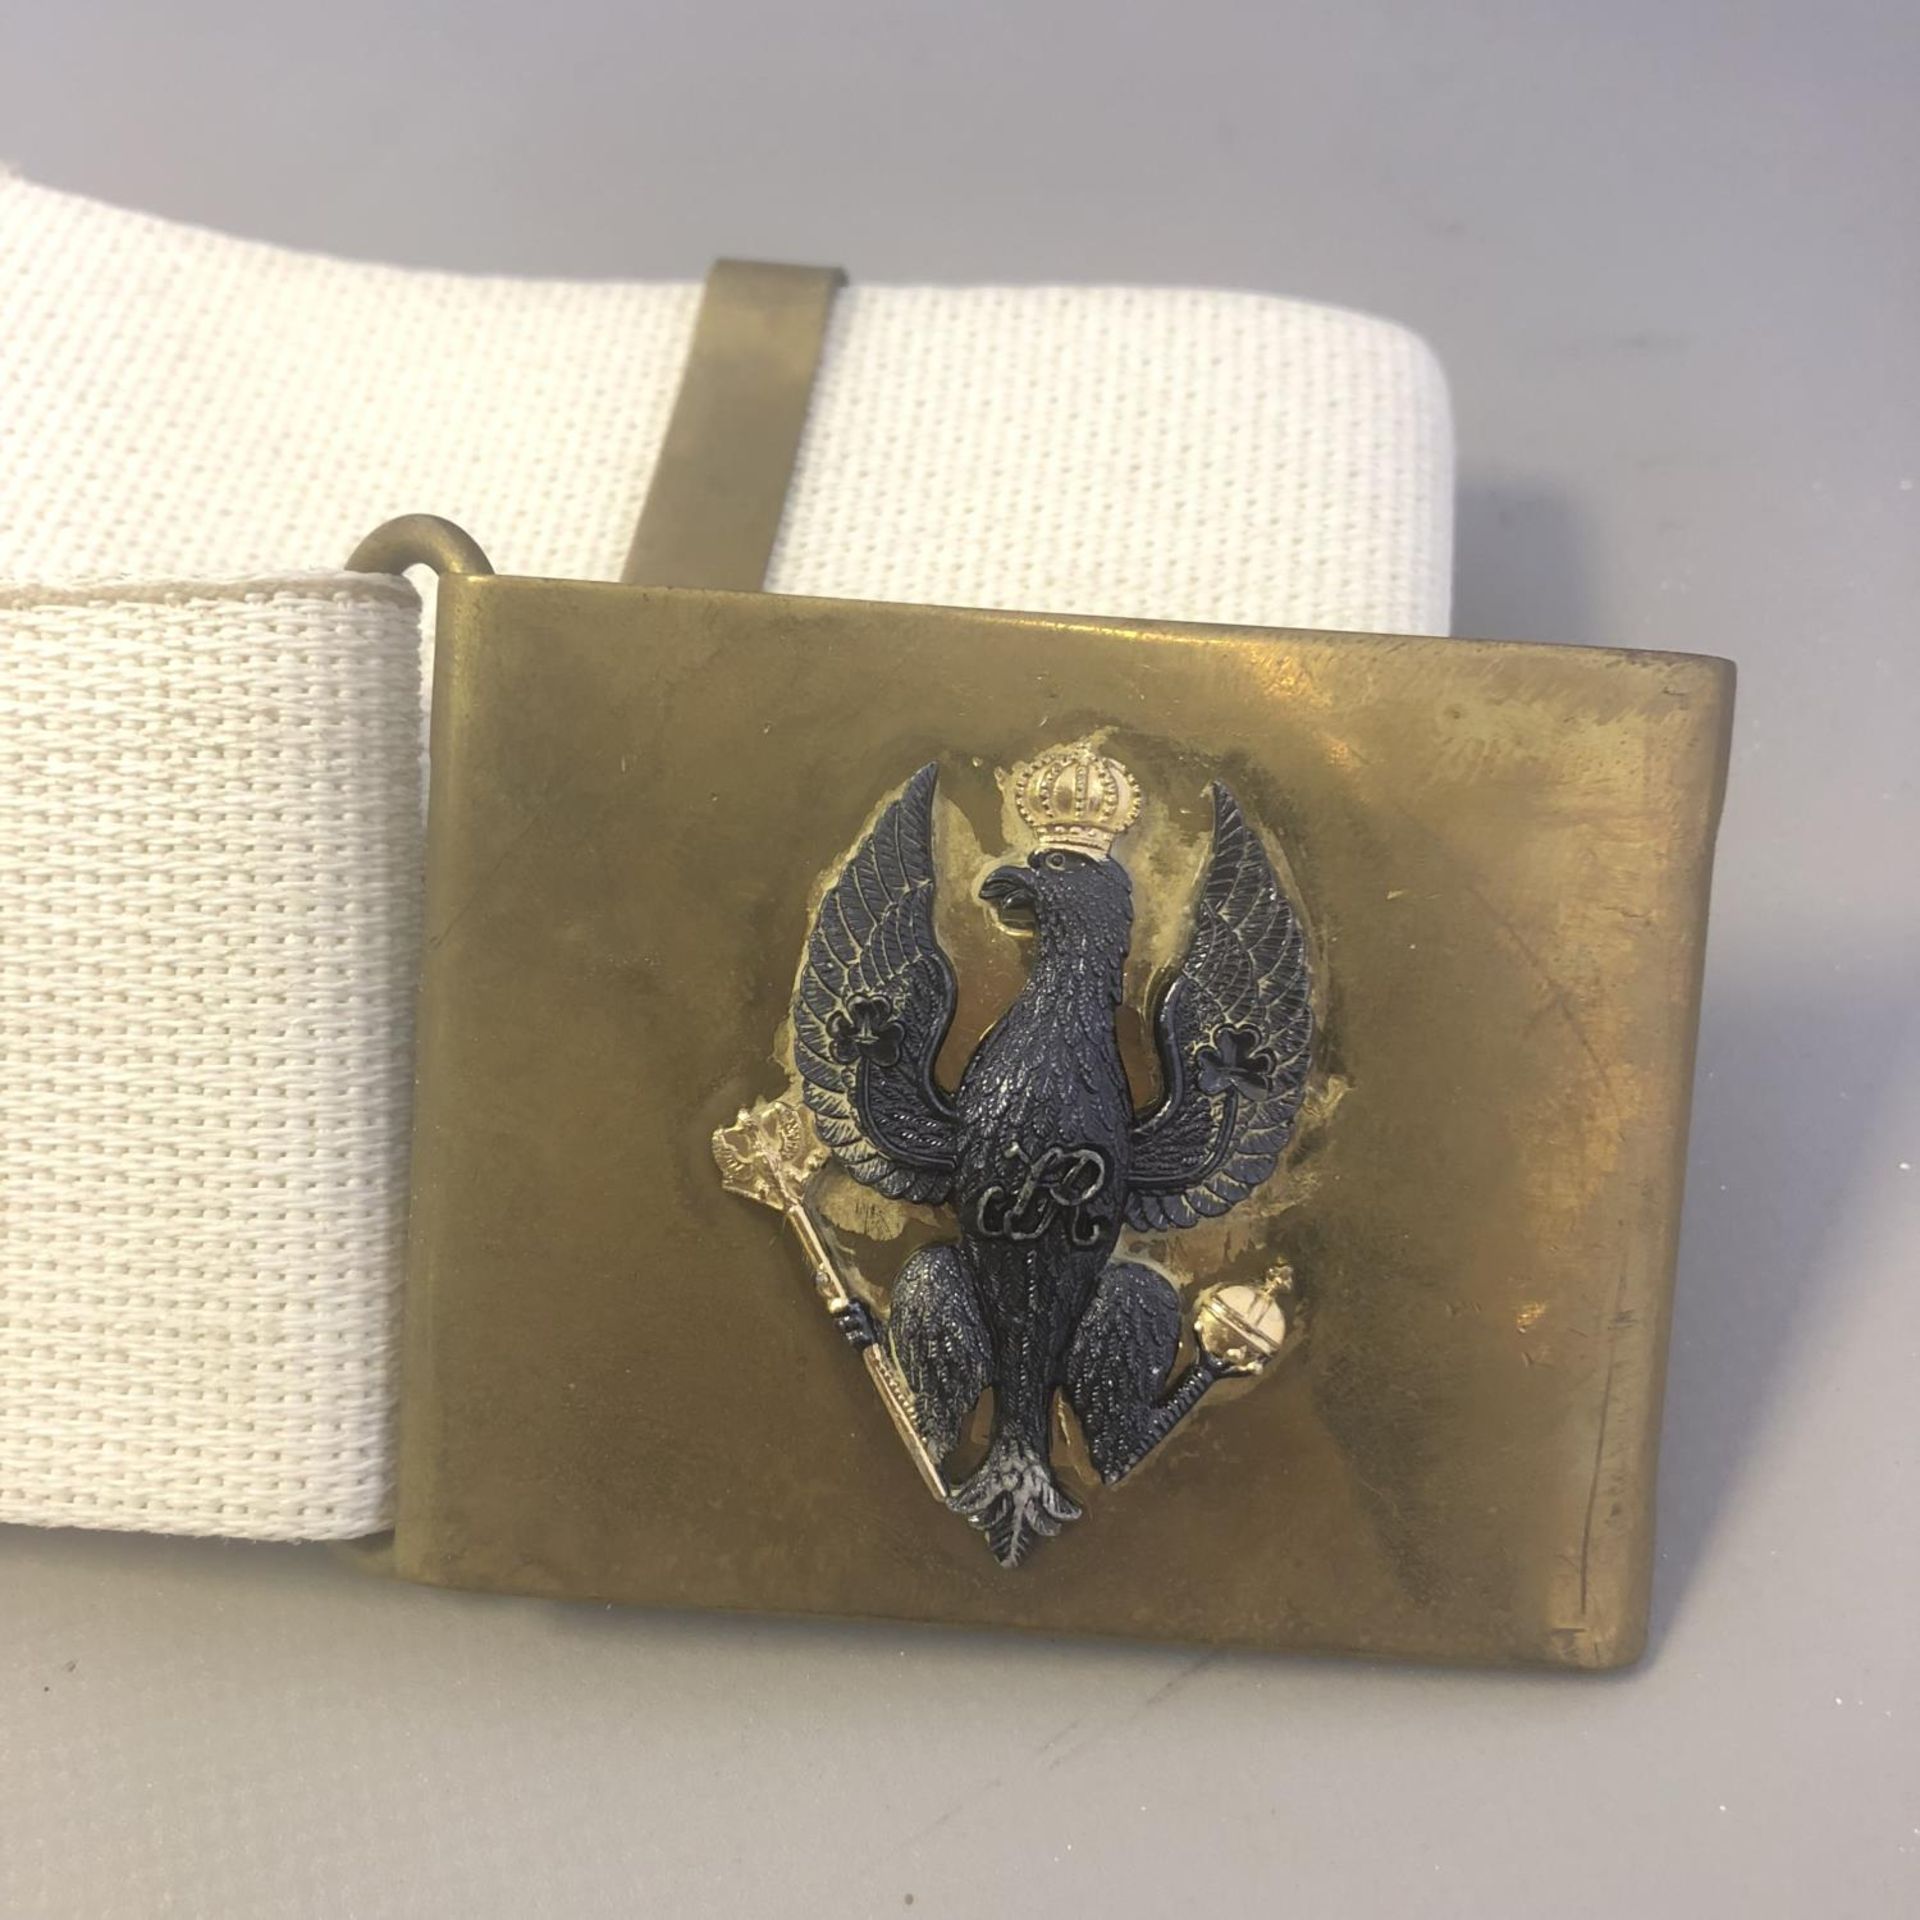 British Army White Belt with King's Royal Hussar's Brass Buckle - Image 2 of 3